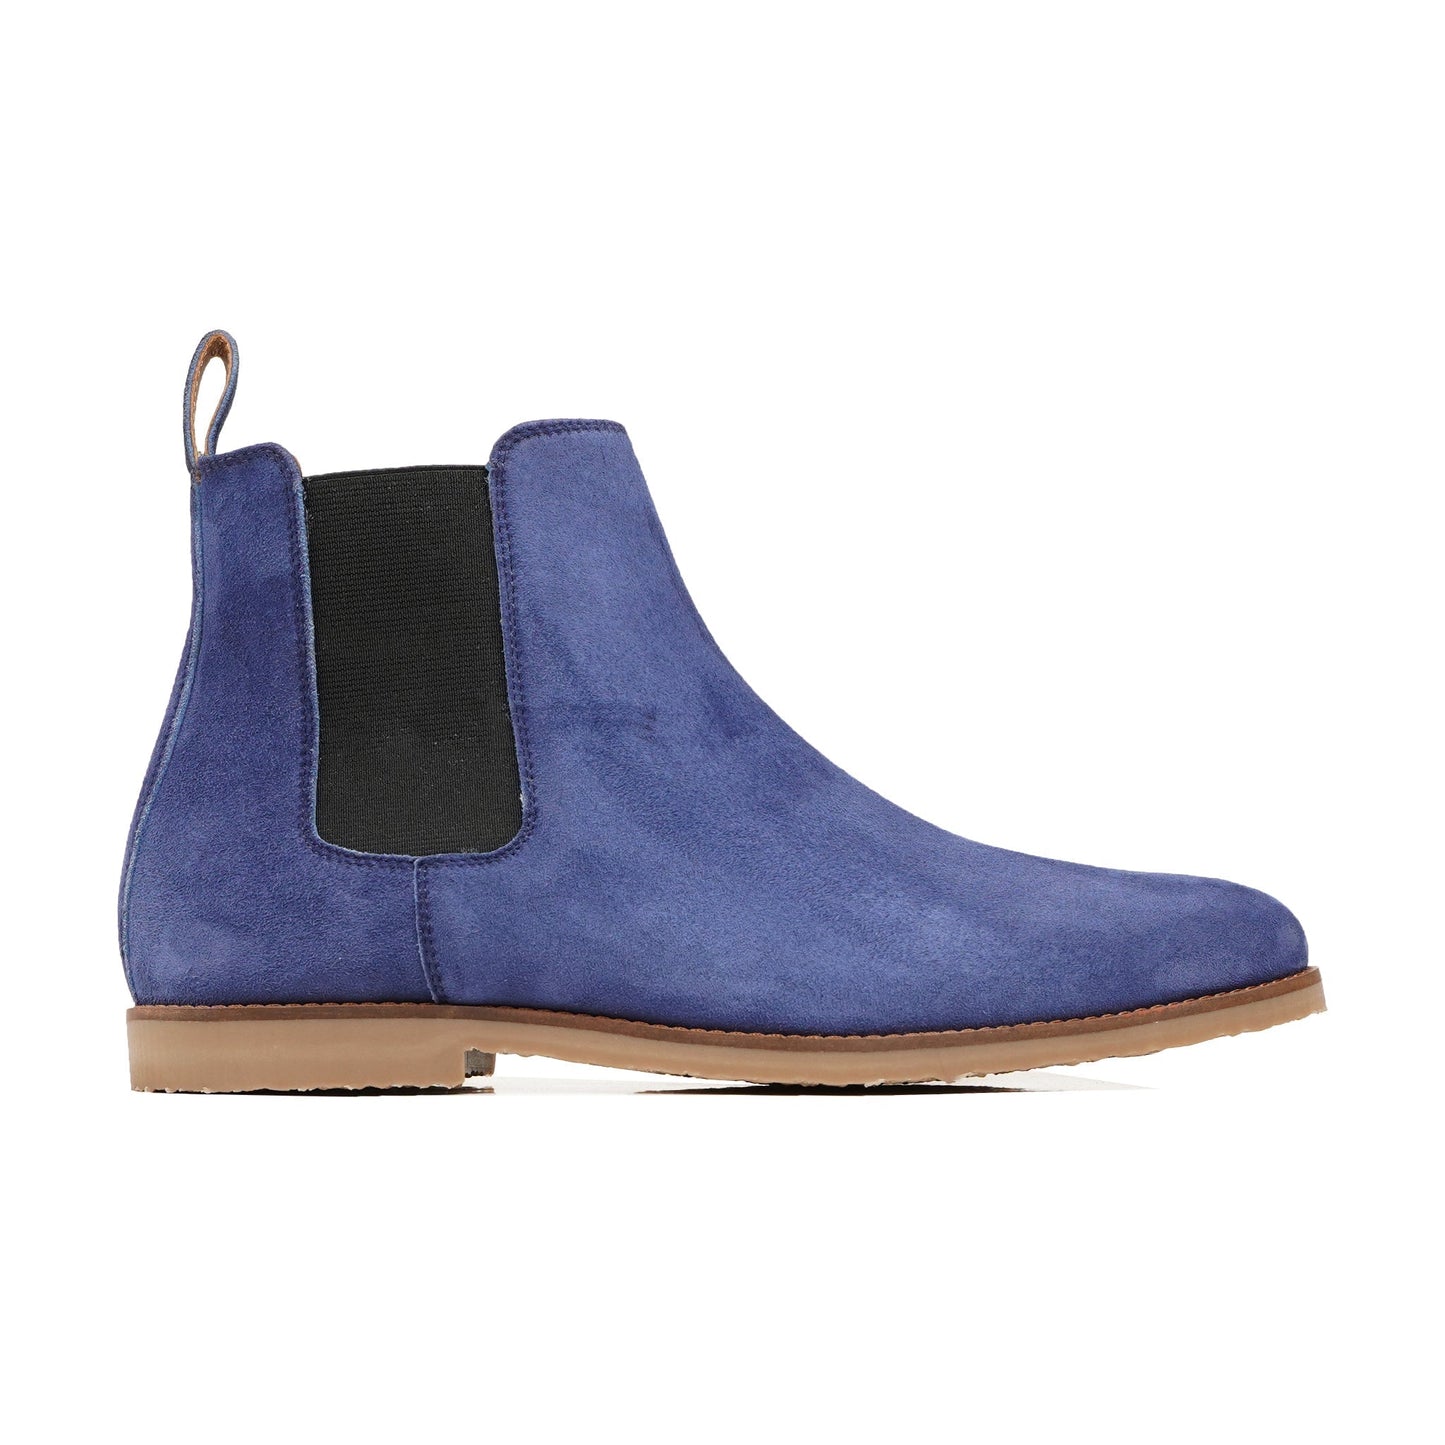 Suede Leather Chelsea Boots For Men Leather Boots